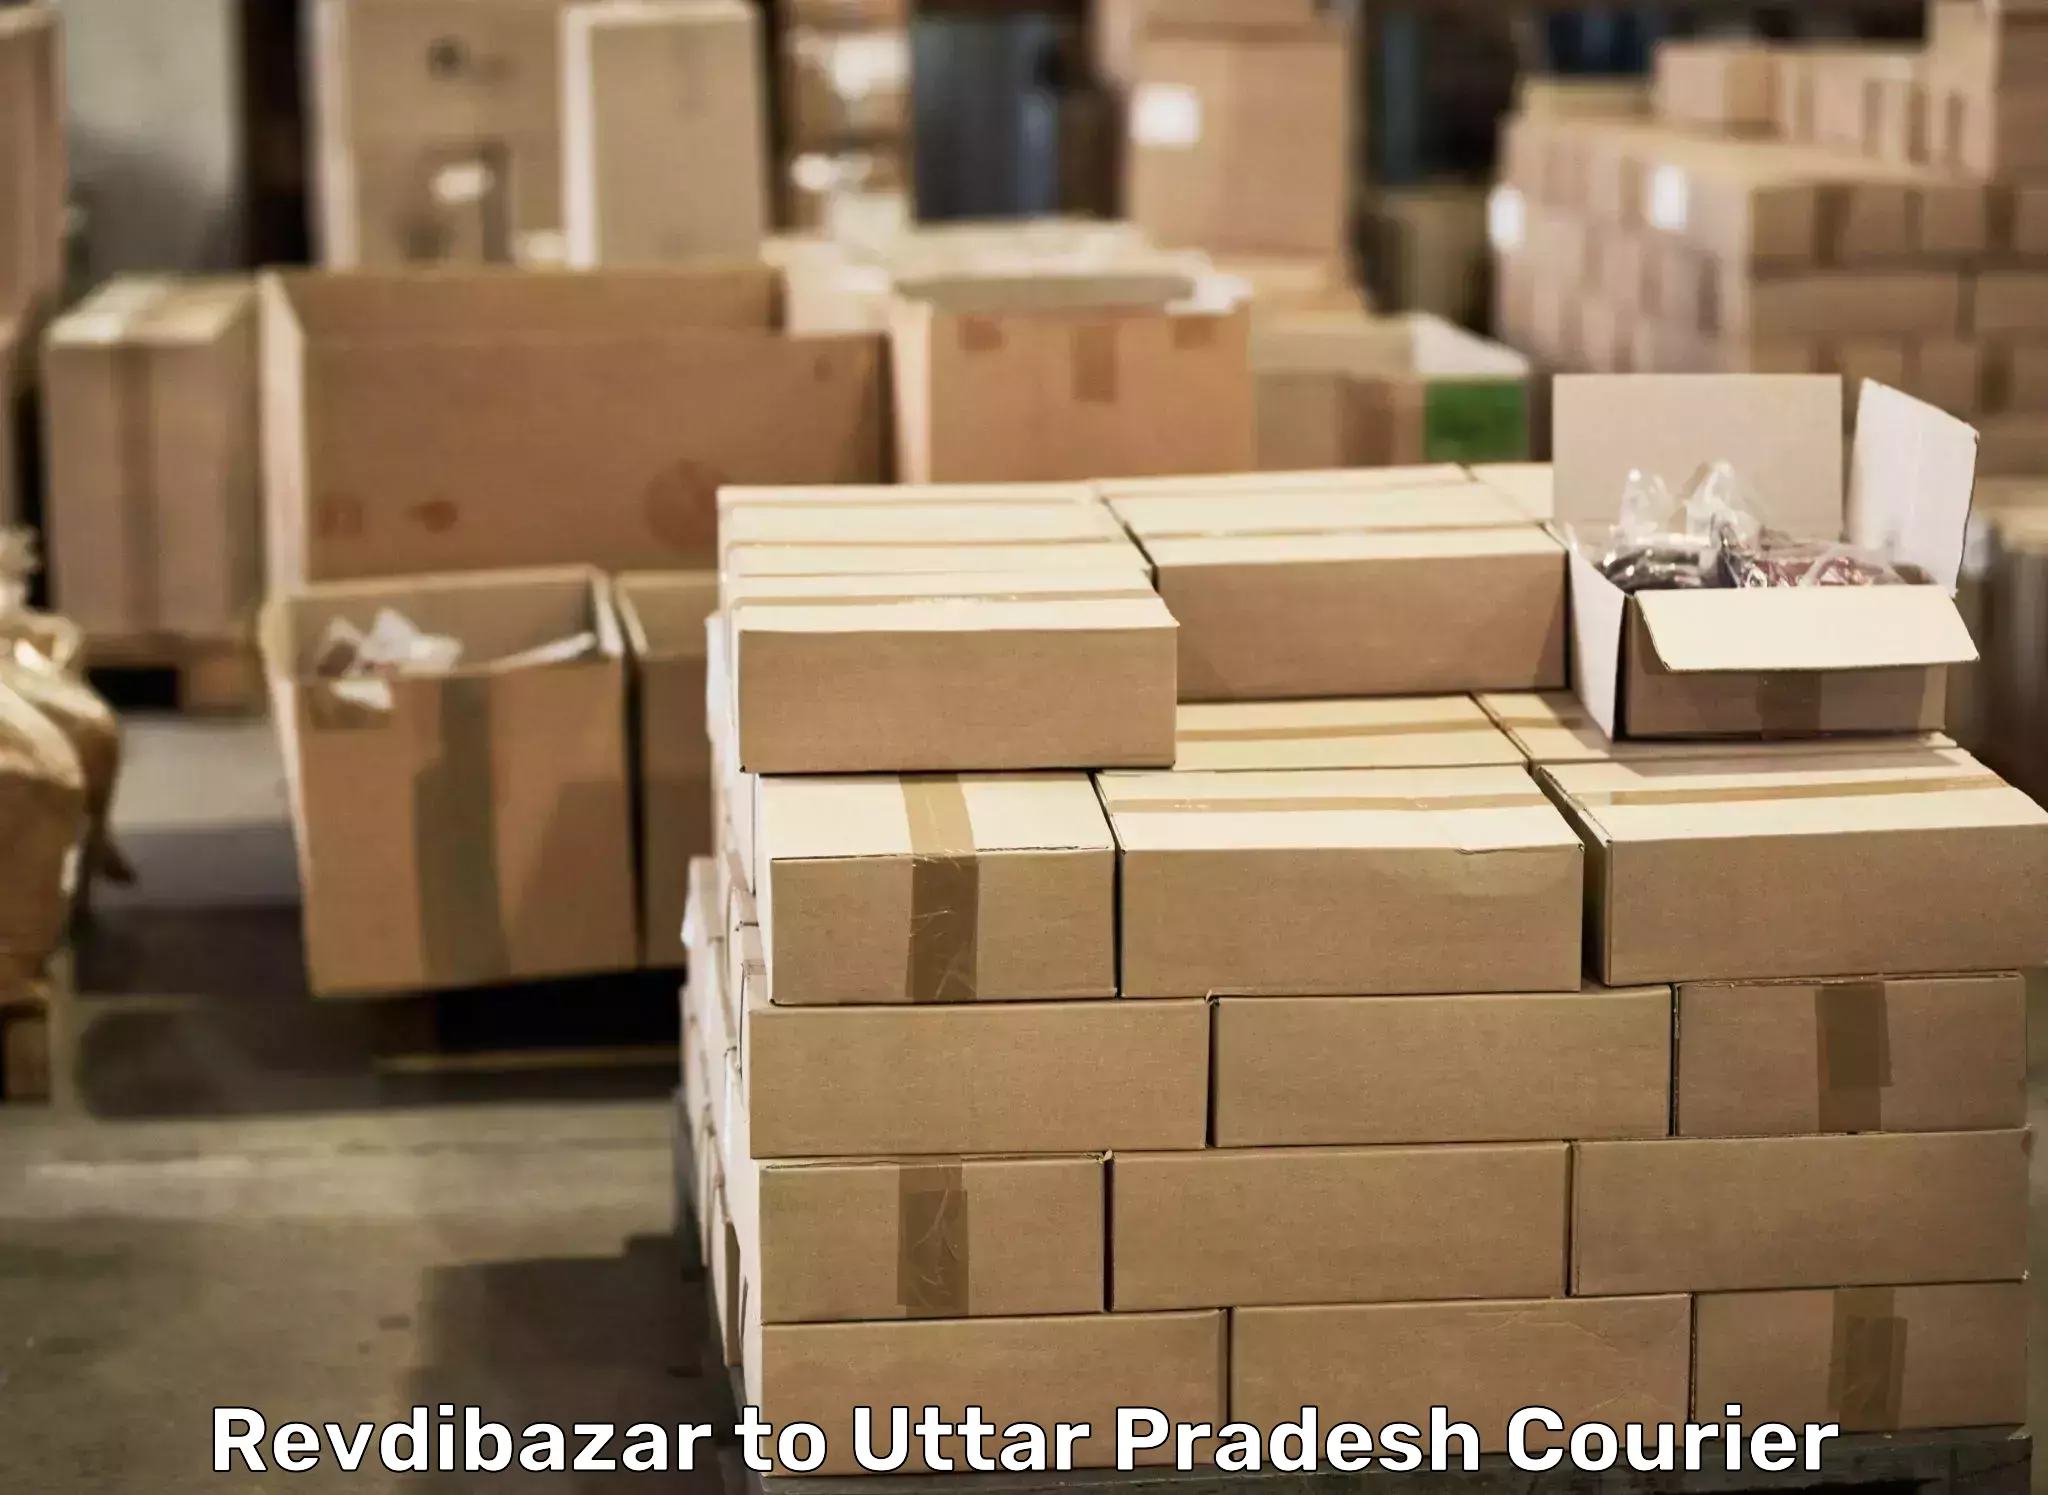 Trusted relocation experts Revdibazar to Kheragarh